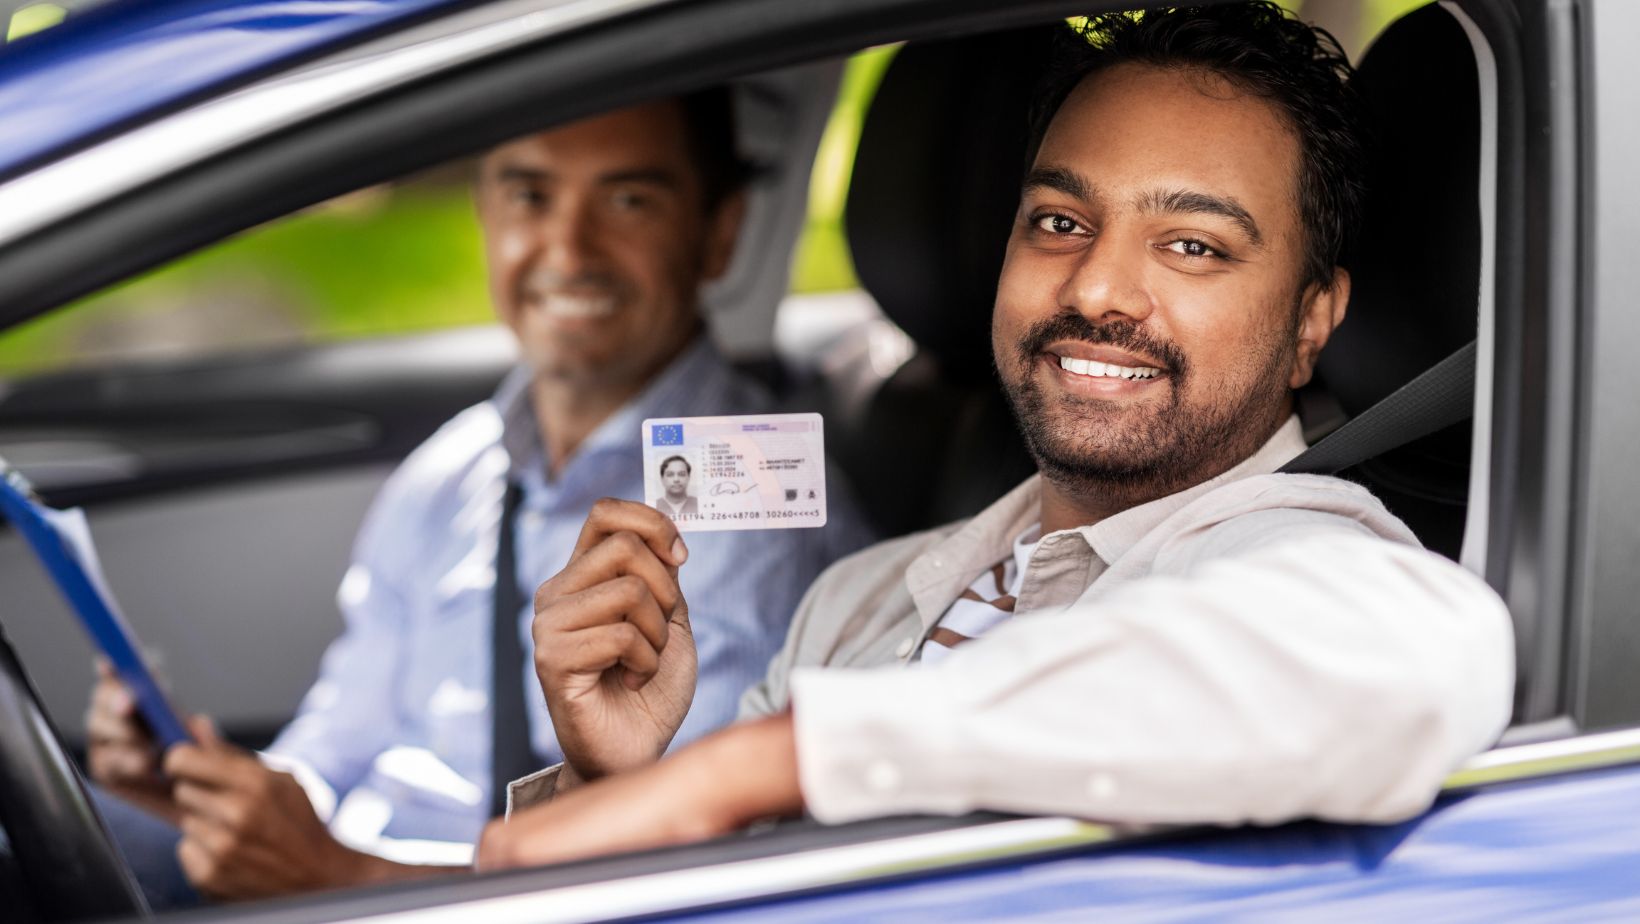 an individual can legally have both a texas driver's license